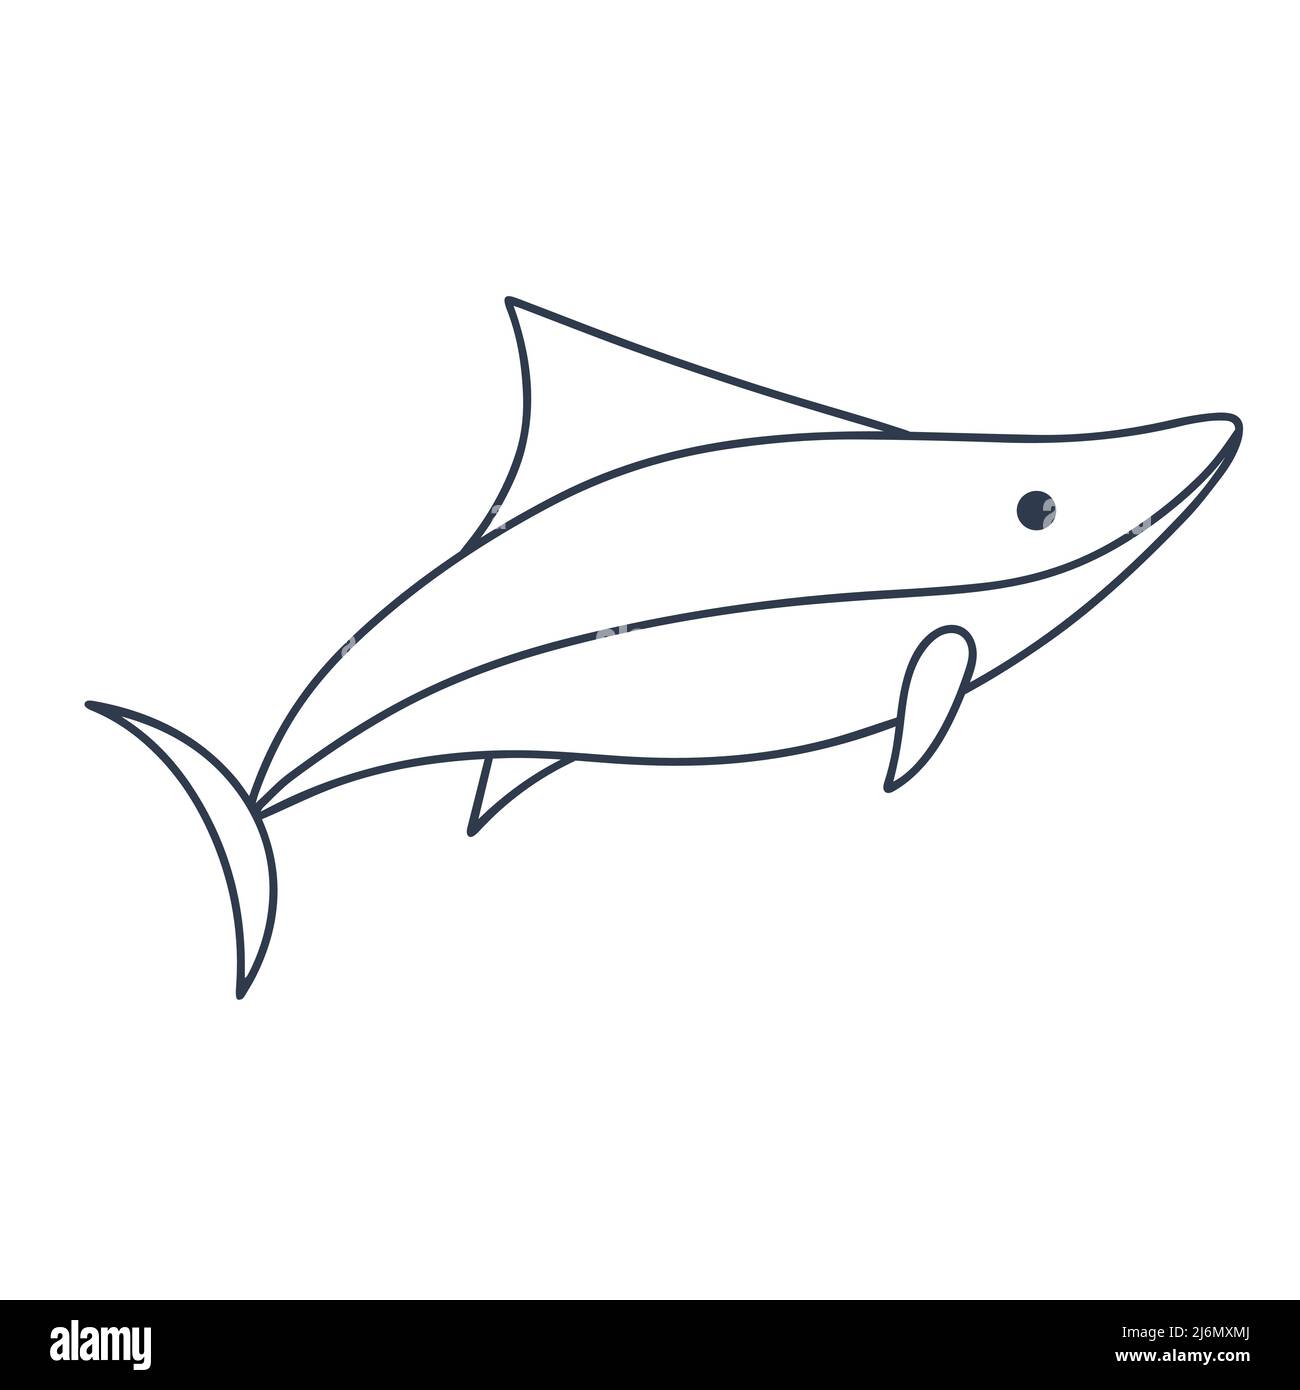 Shark outline Stock Vector Images - Alamy